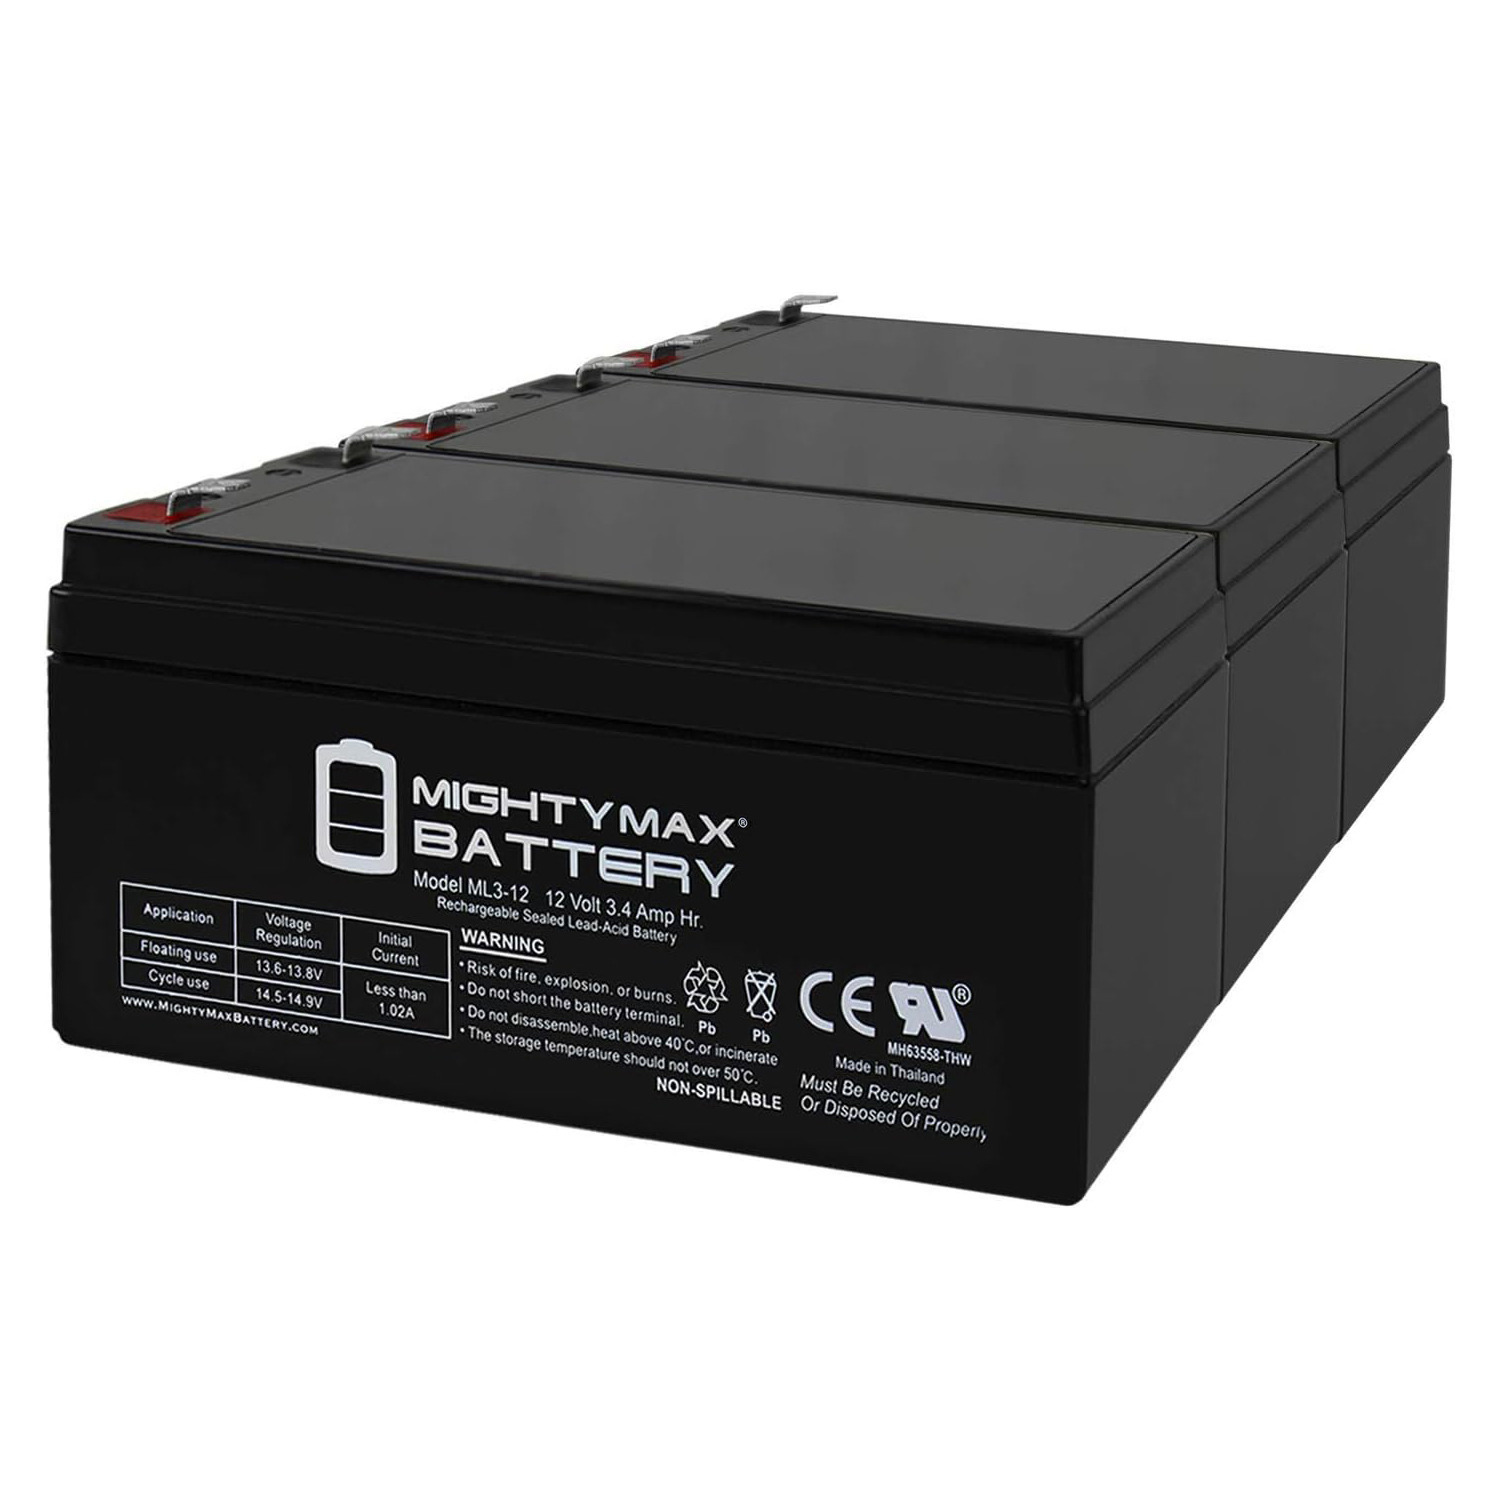 ML3-12 - 12V 3AH Replacement Battery for Yuasa NP3.4-12, NP 3.4-12 Btty - 3 Pack